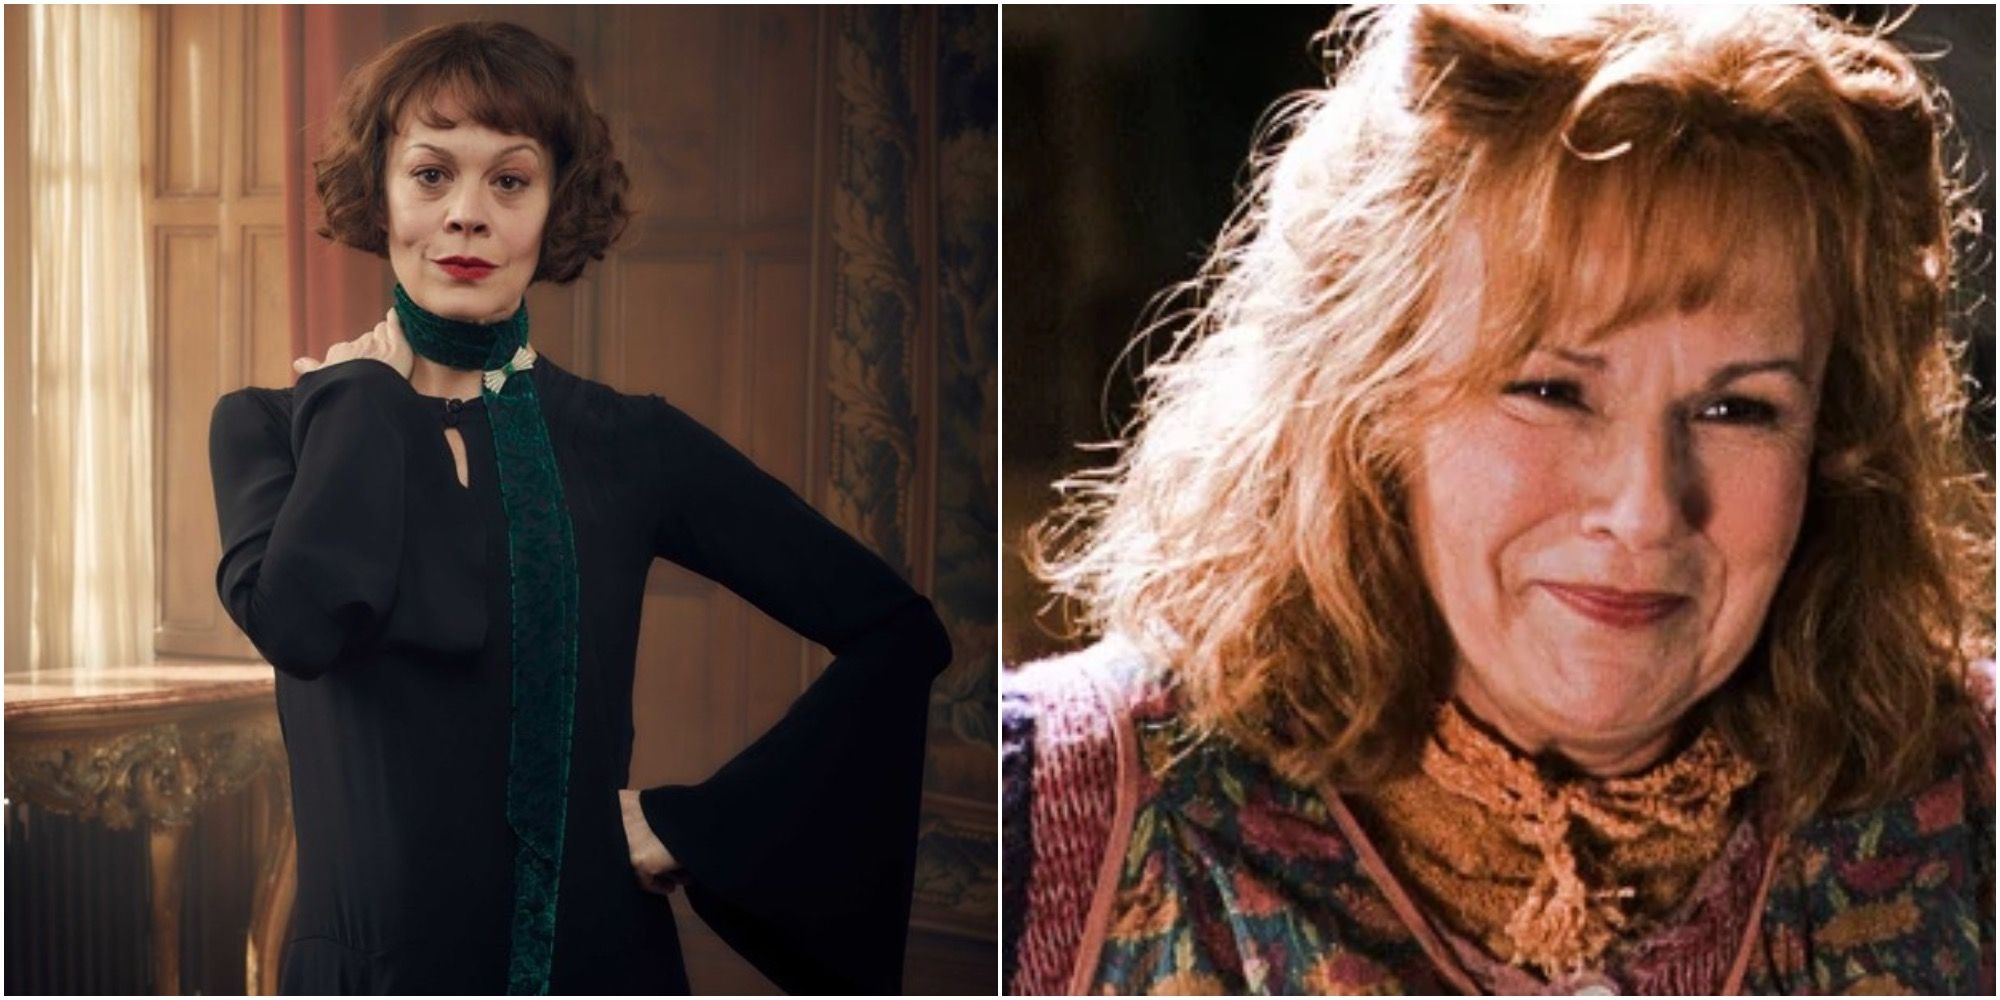 Split image of Polly Gray (Peaky Blinders) and Molly Weasley (Harry Potter)